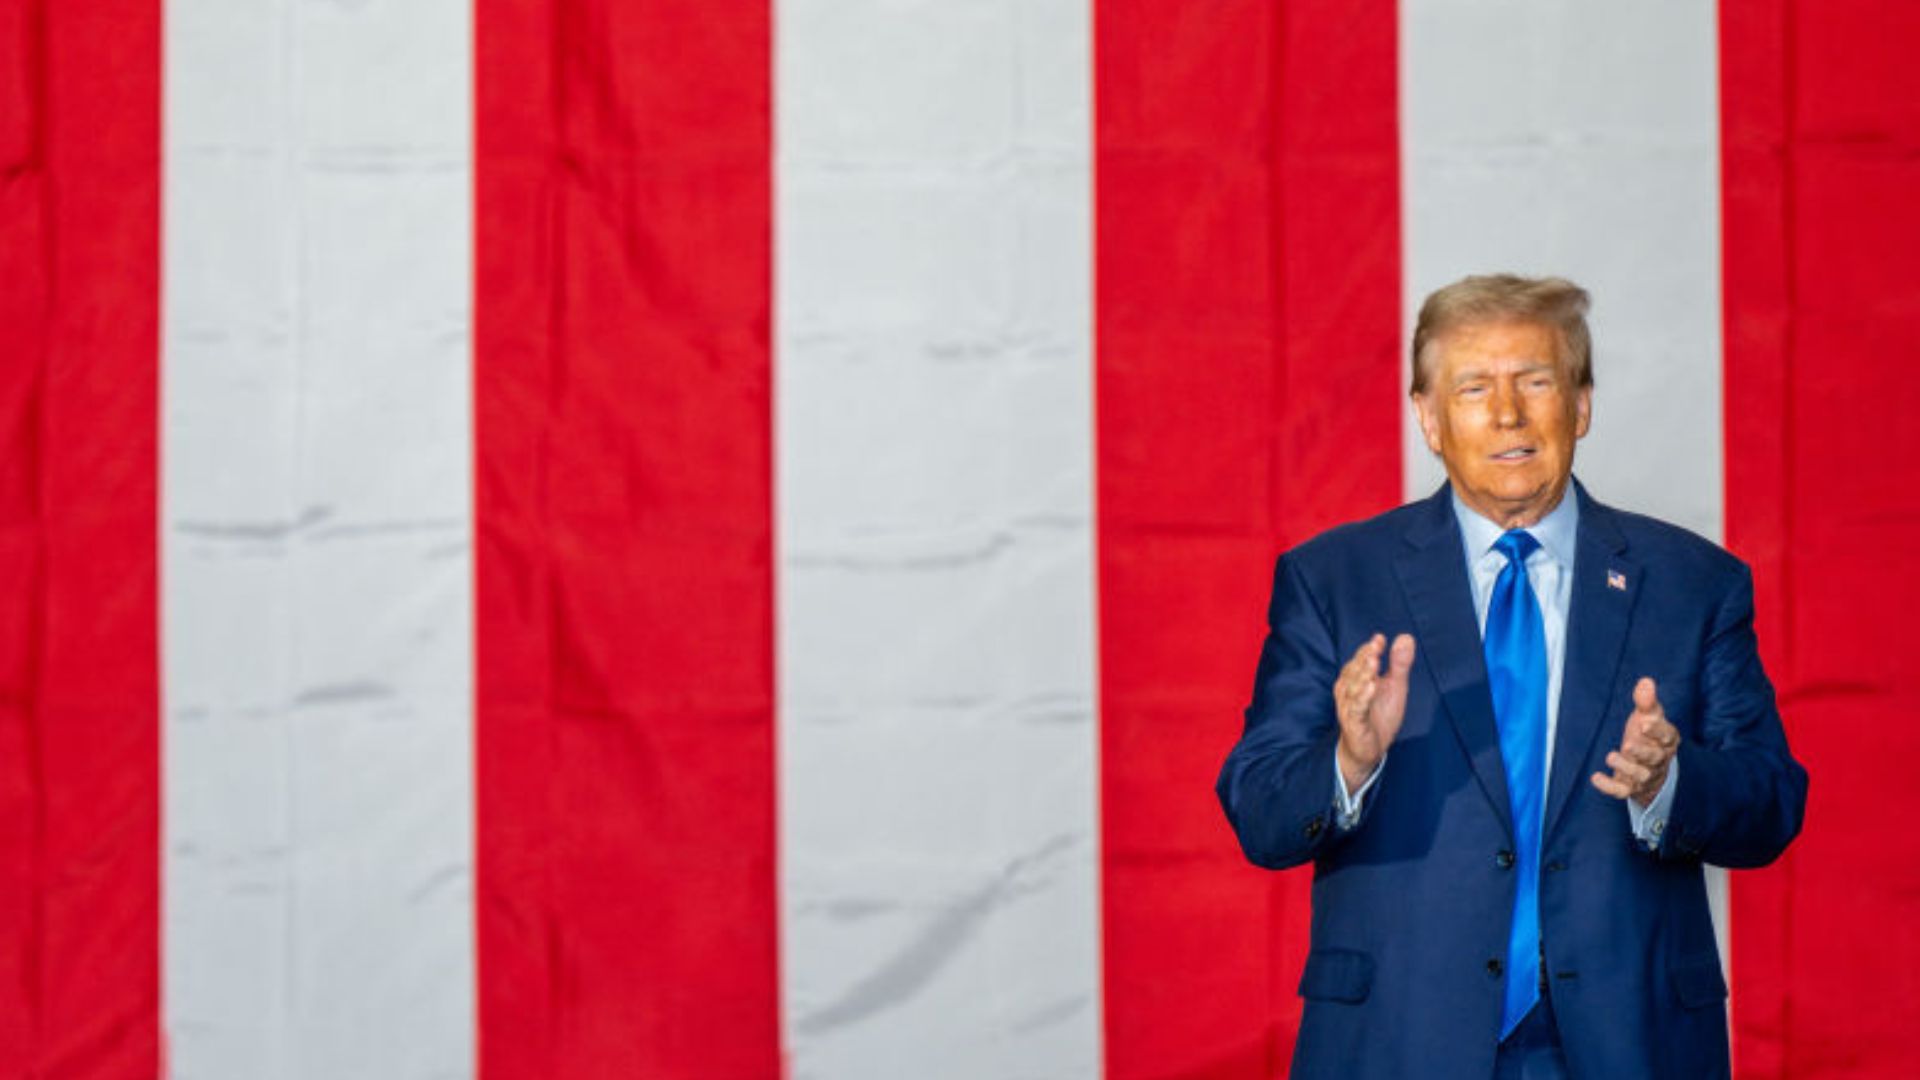 Former President Donald Trump wearing a blue suit and red tie, standing and speaking in front of a large American flag